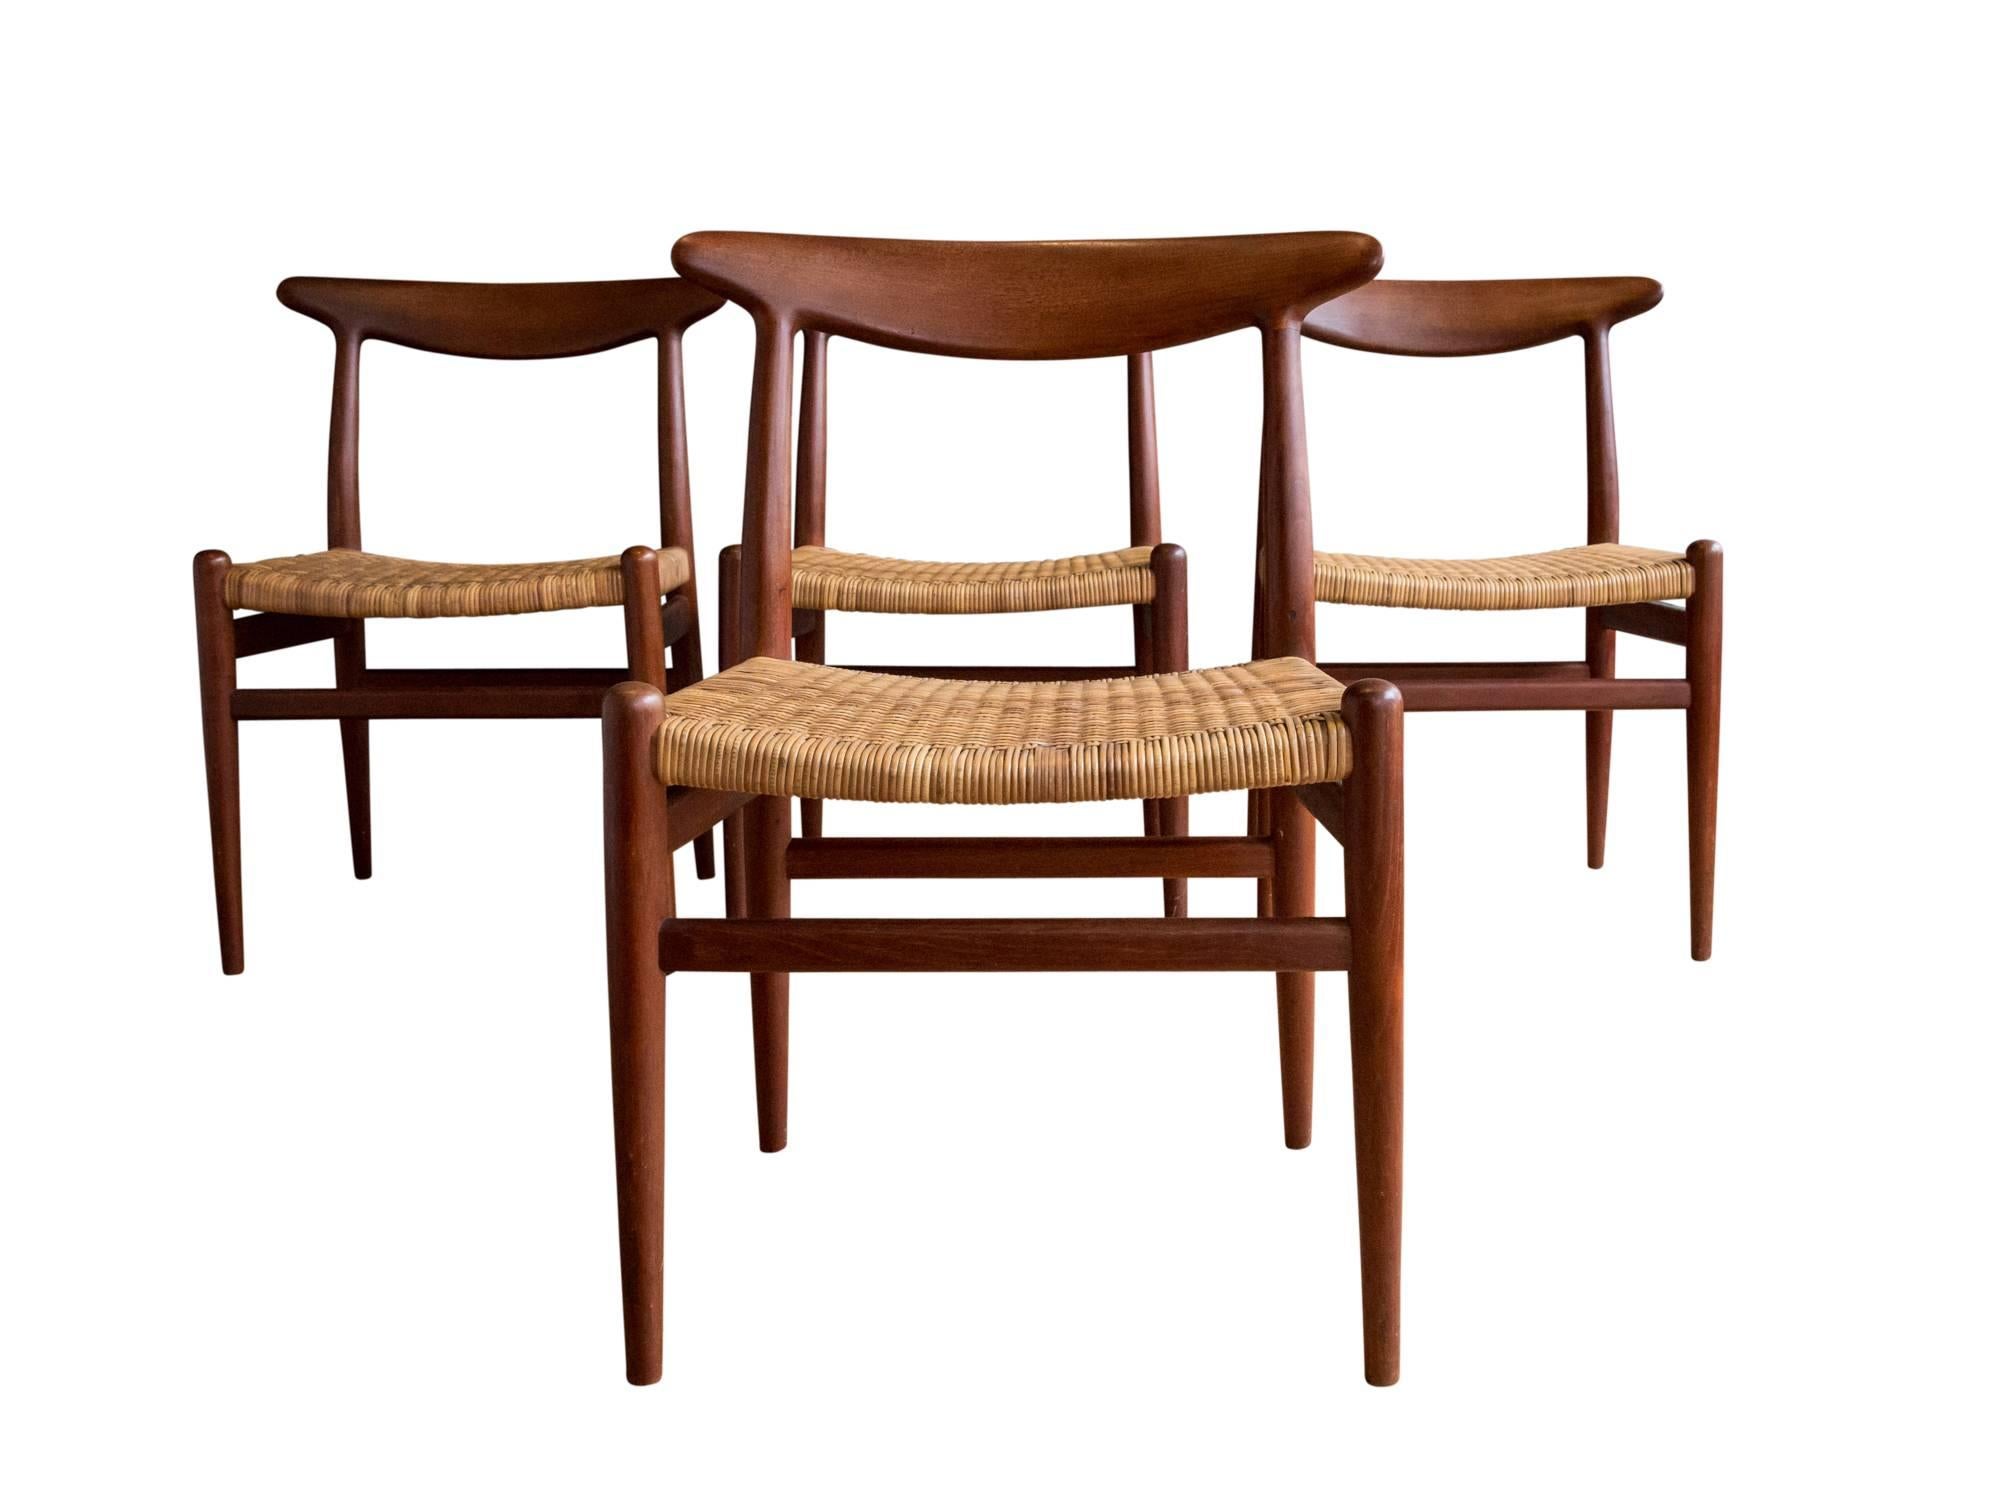 A set of four "W2" dining or side chairs designed by Hans Wegner in 1953. Manufactured by C. M. Madsens Fabriker, circa 1950s. Featuring elegantly carved solid teak frames with curved, tapered back rests. Woven cane seats are in excellent